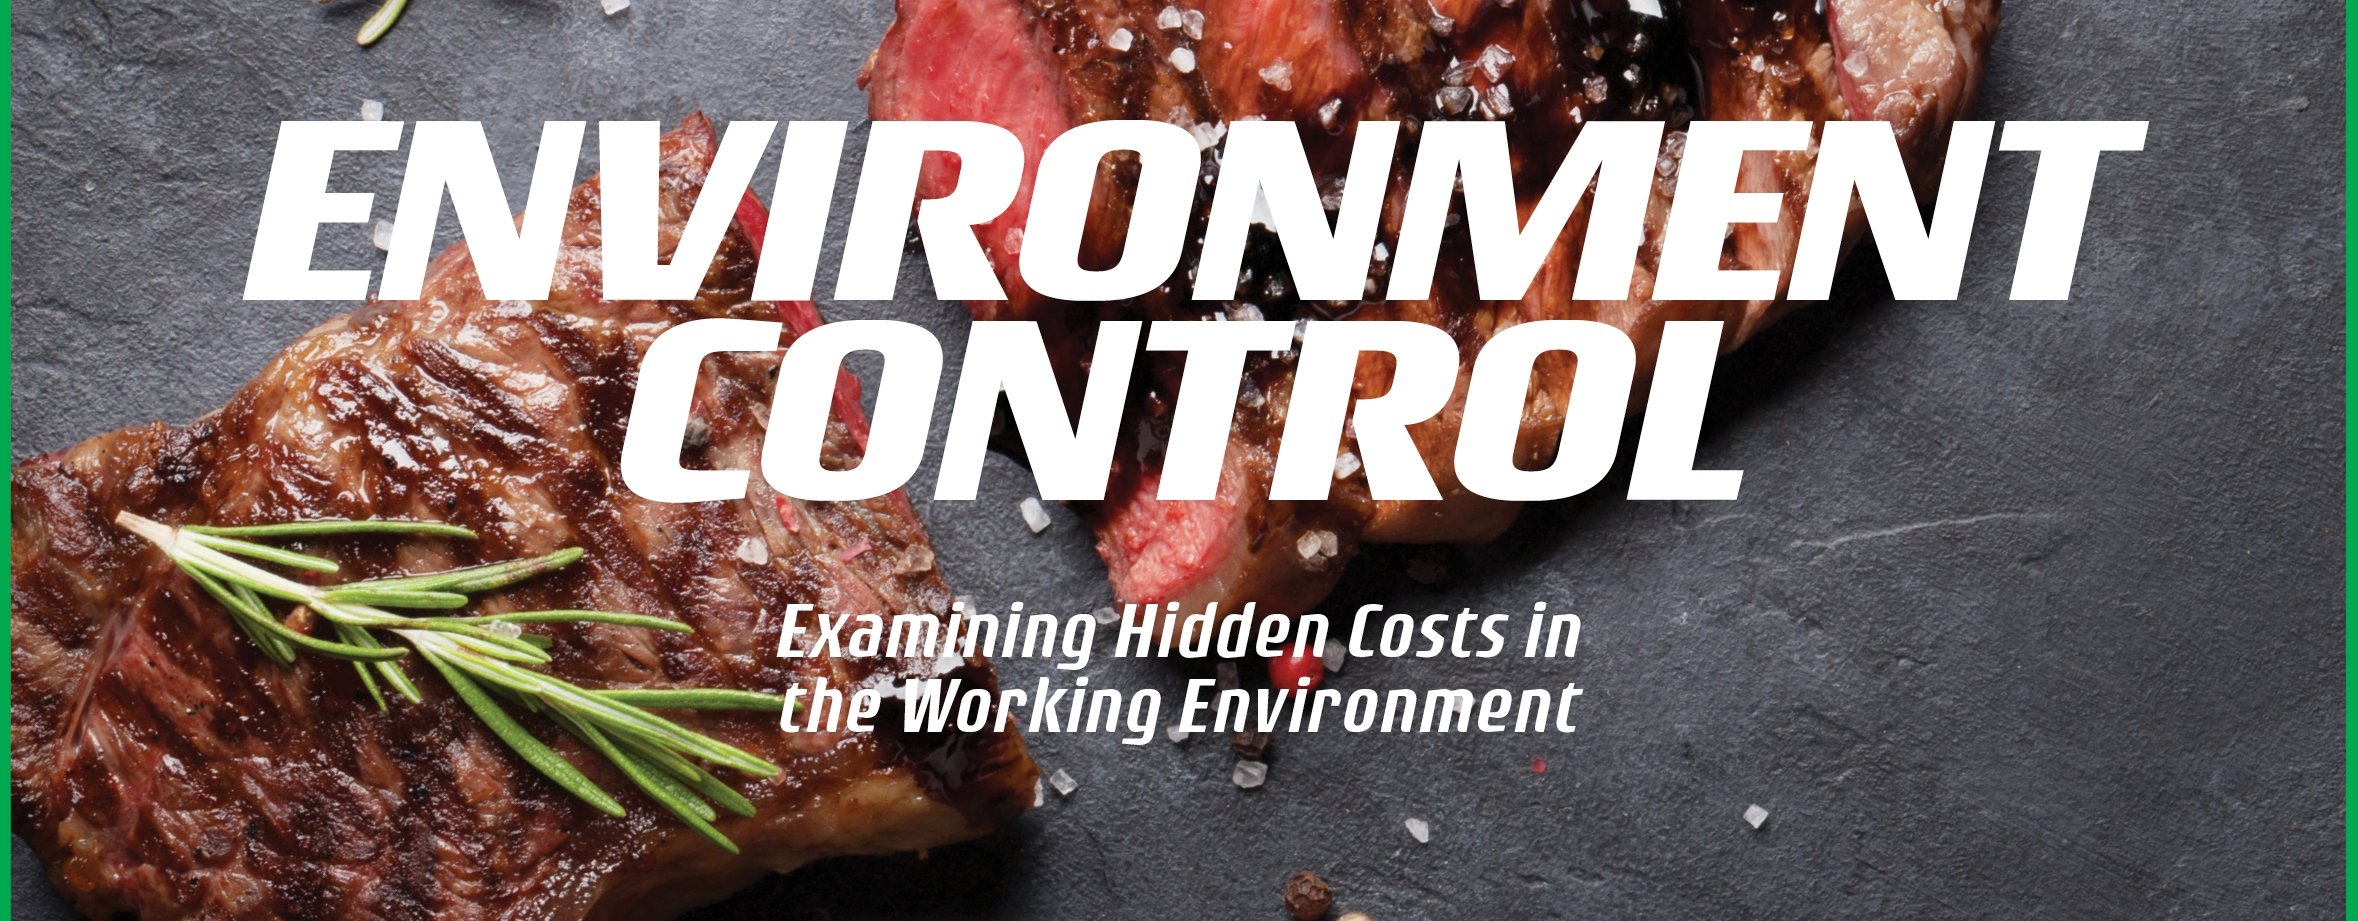 Proper environmental control in your restaurant means avoiding all kinds of hazards, not just contamination.